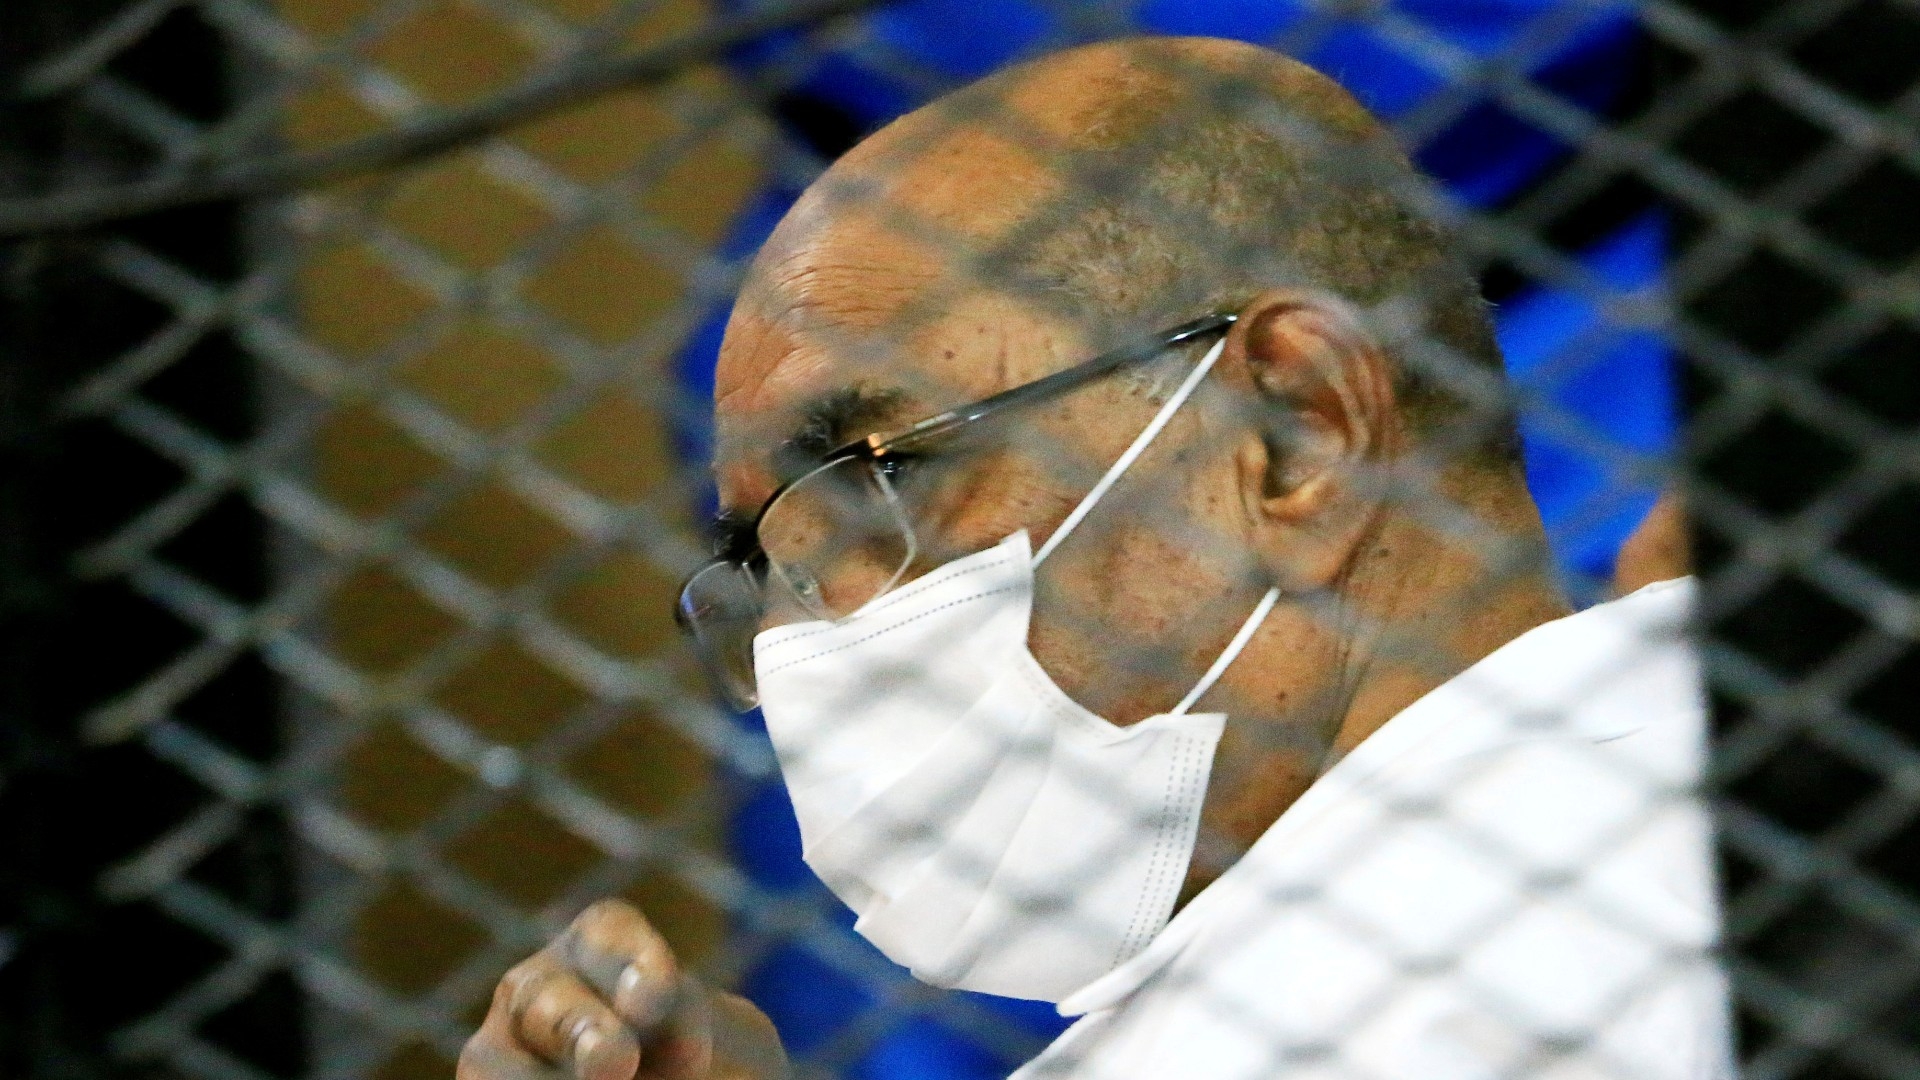 Omar al-Bashir is seen inside the defendant's cage during his trial over the 1989 military coup that brought the autocrat to power in 1989, at a courthouse in Khartoum in 2020 (Reuters)